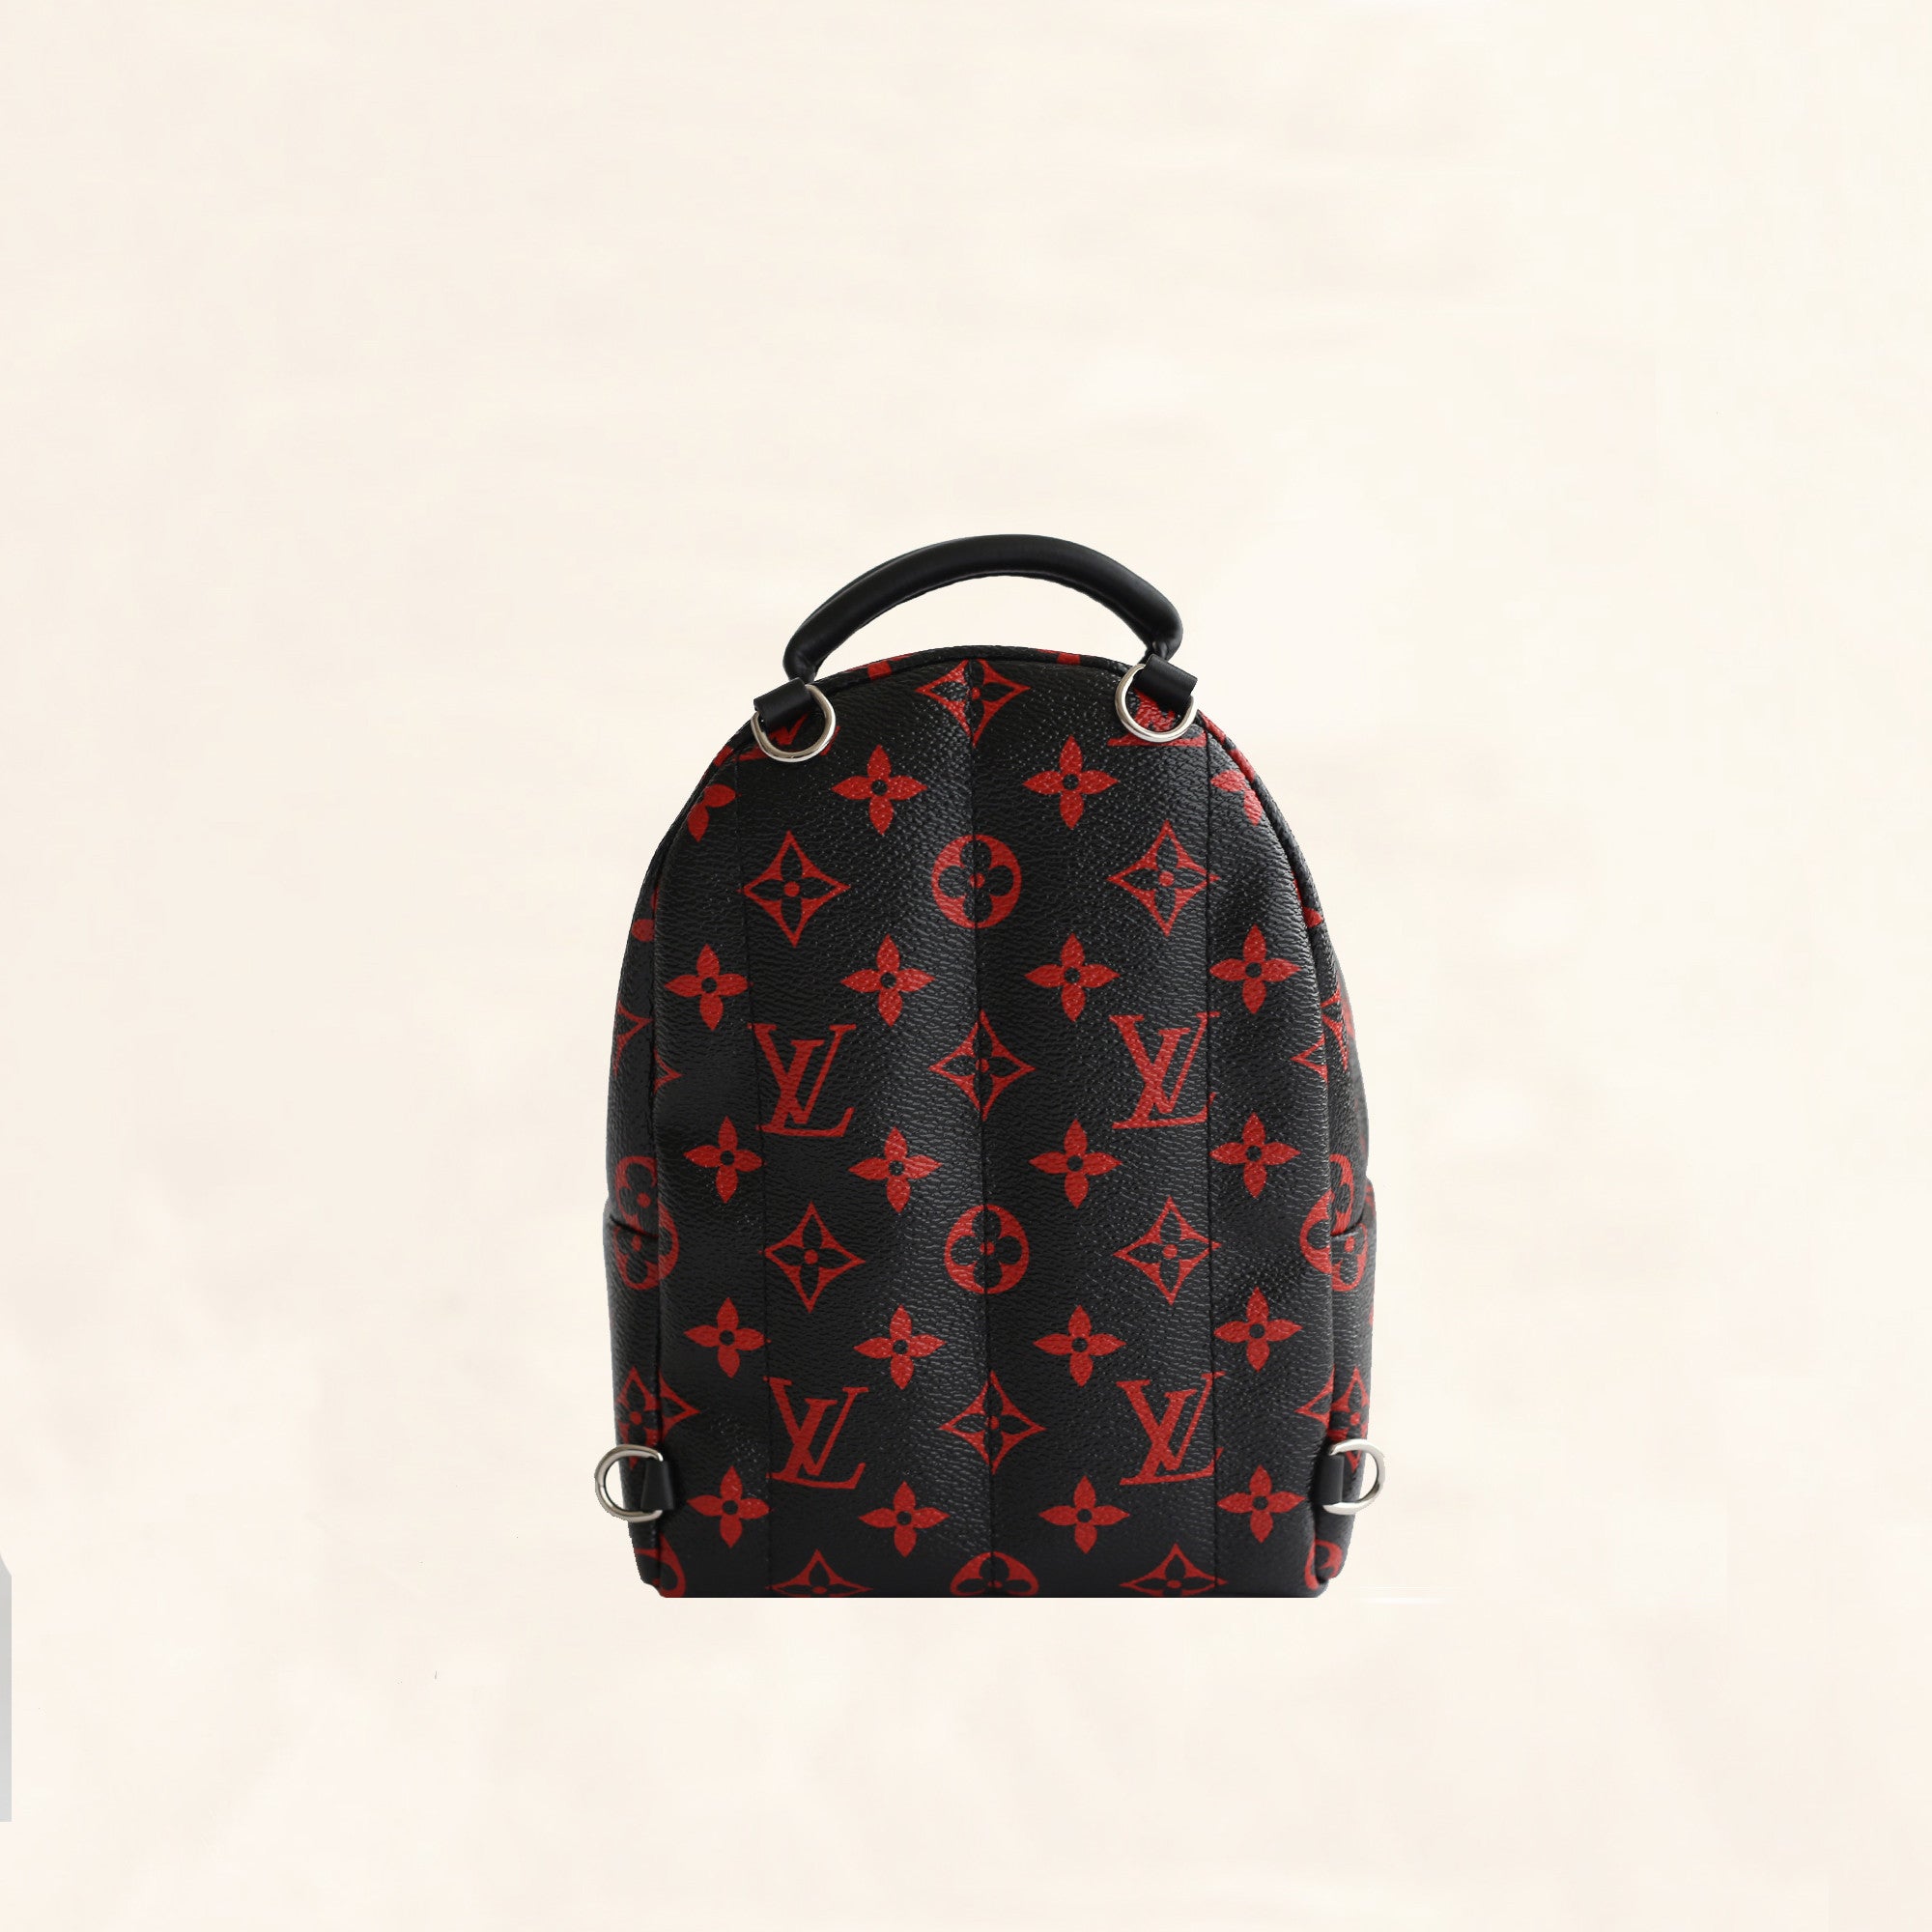 Louis Vuitton Palm Springs Backpack Mini Price Malaysia | Confederated Tribes of the Umatilla ...